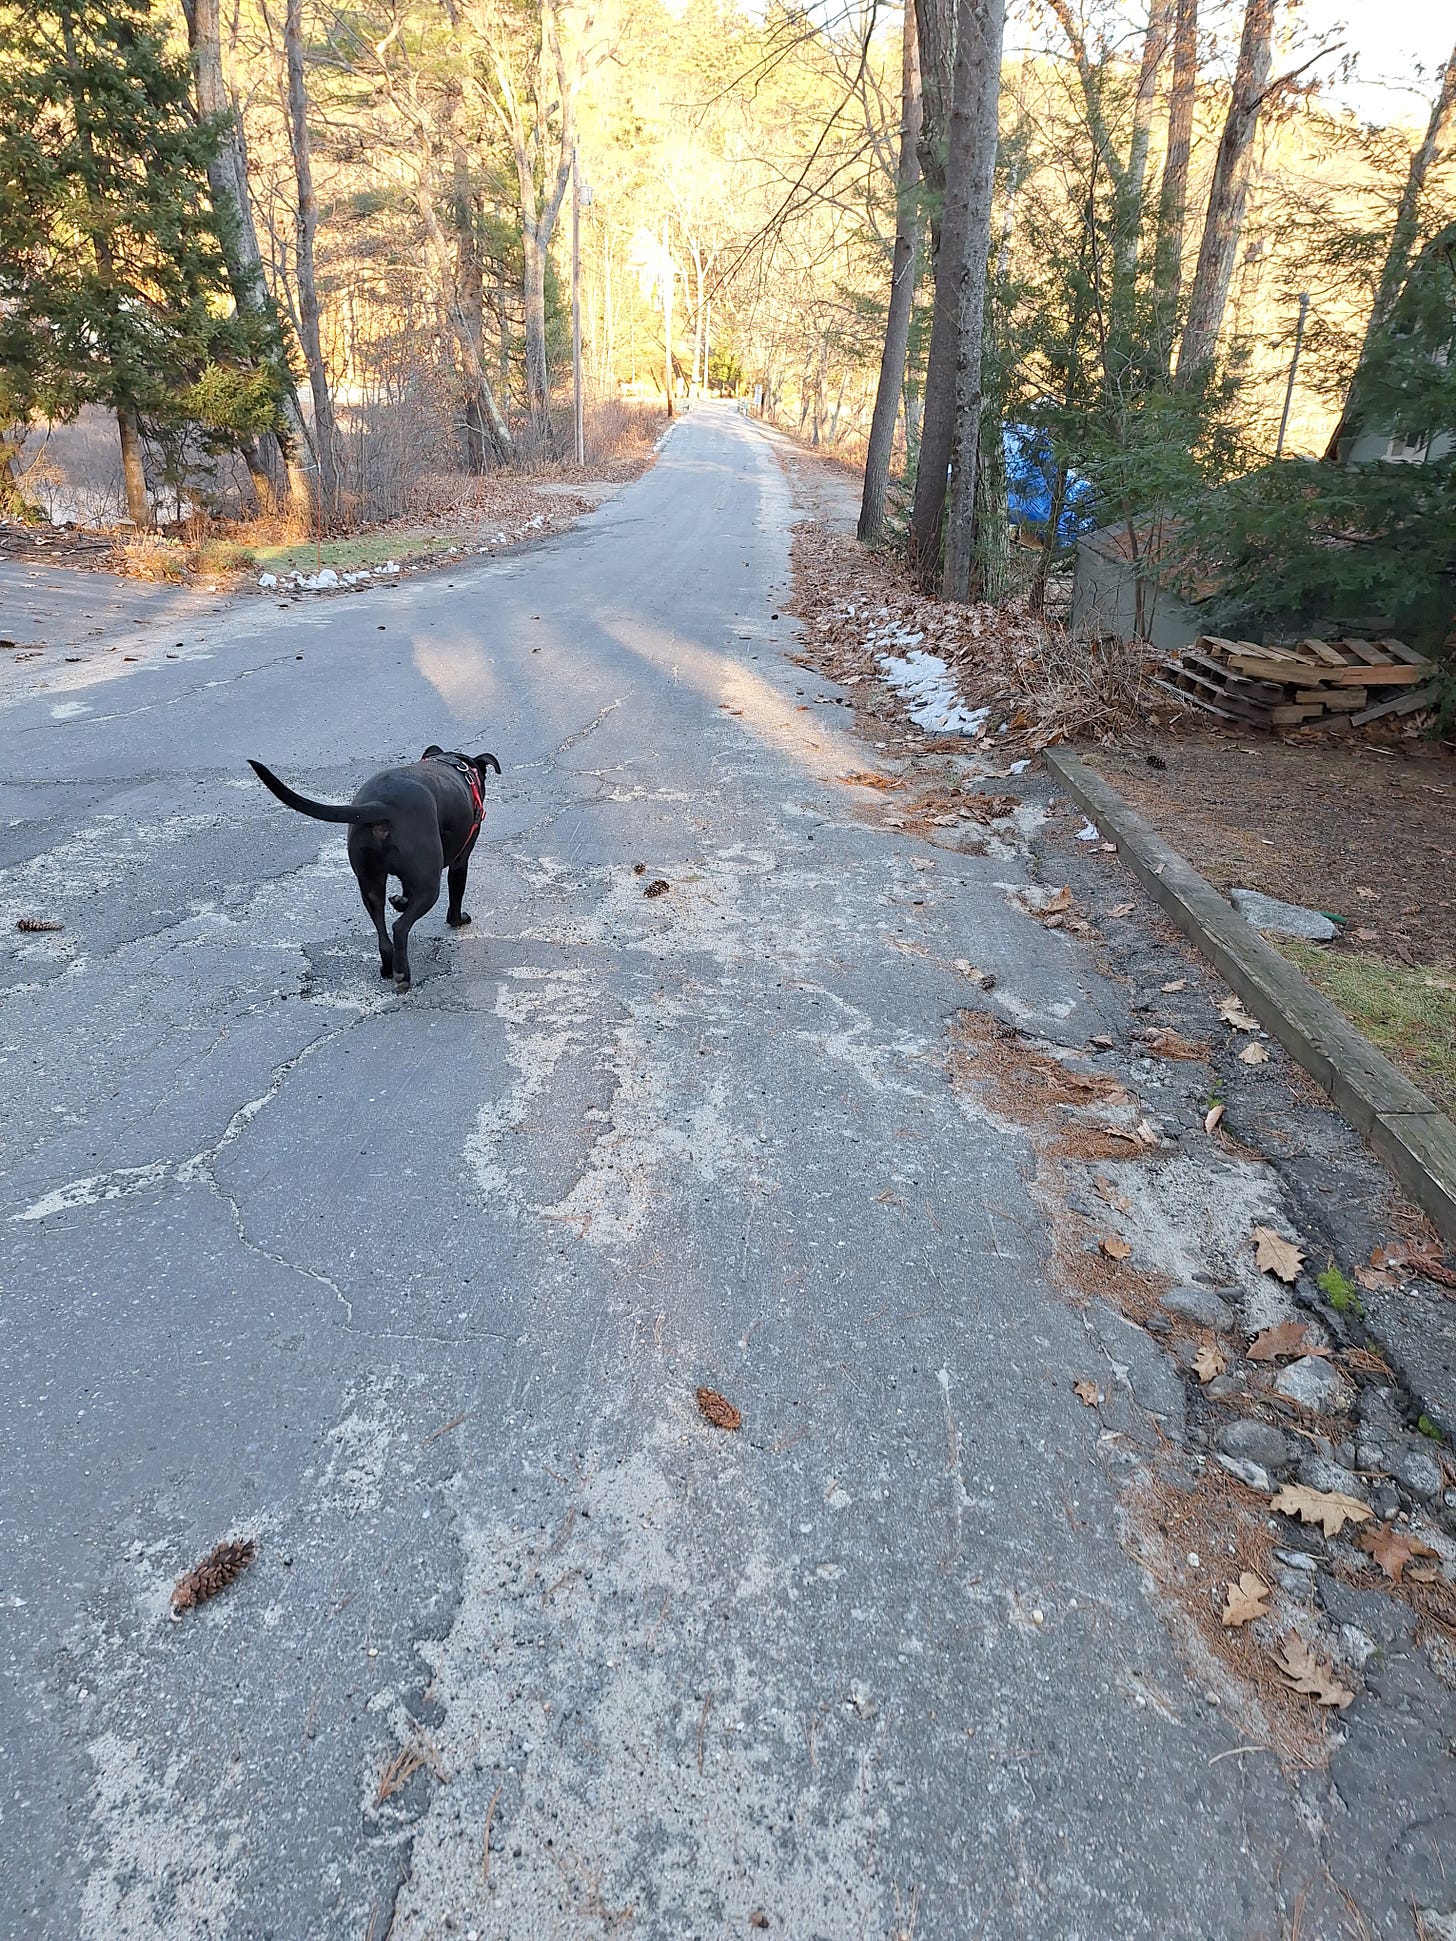 My dog Boogaloo heading down a road into a bright sunny area